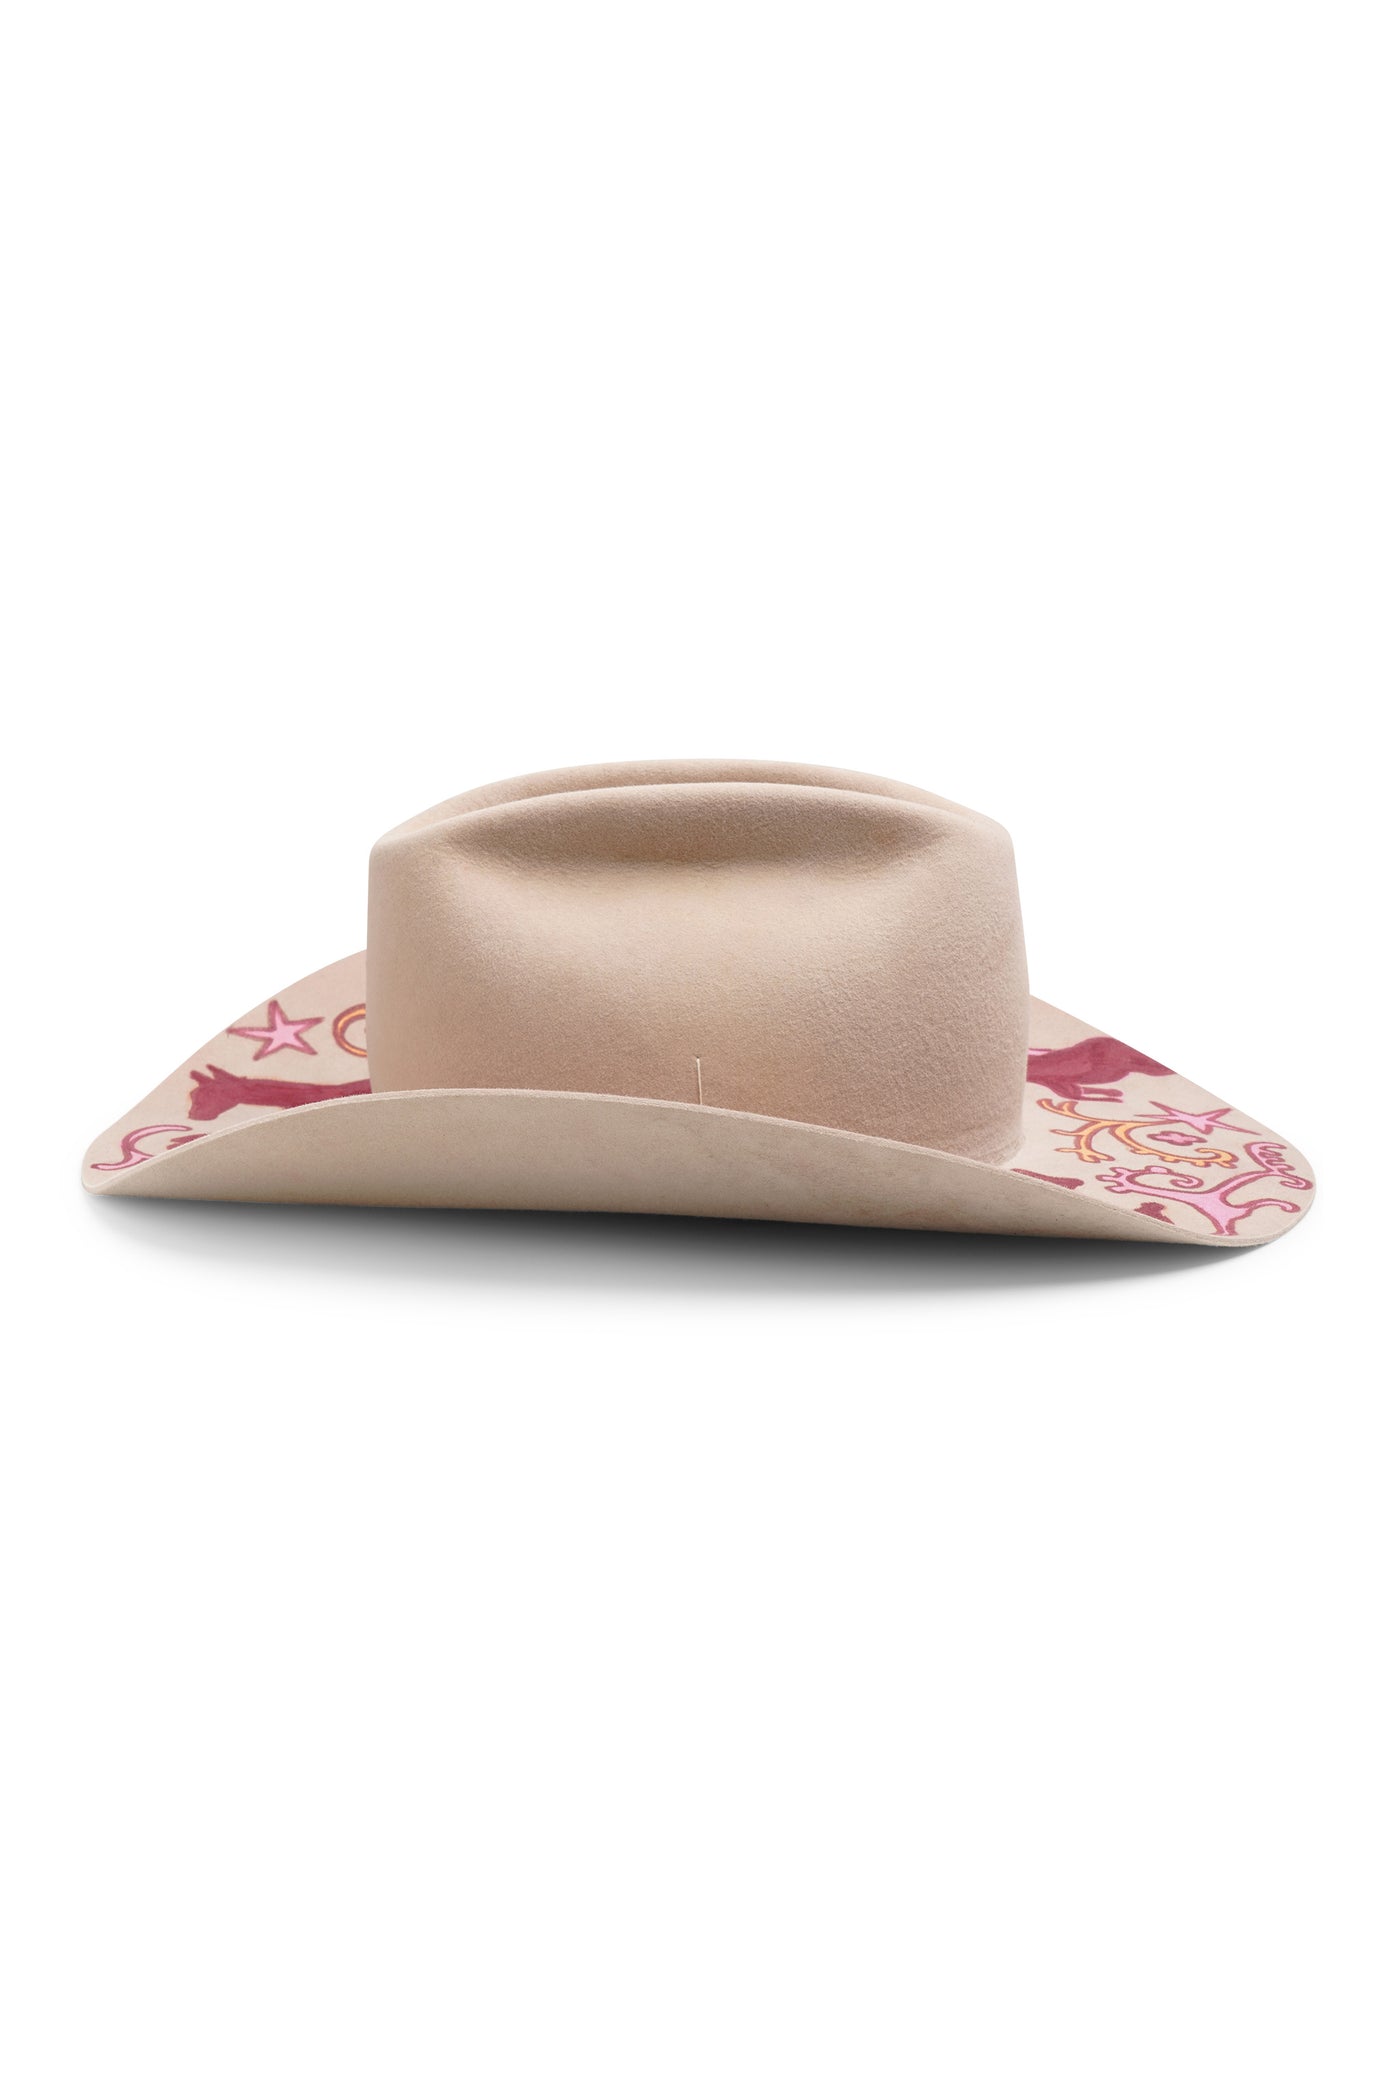 Beige hand painted fur felt cowboy hat by artist Maria Murphy. Leather chin strap detail, wide brim and a center crease. Handmade light cowboy hat in Stockholm.